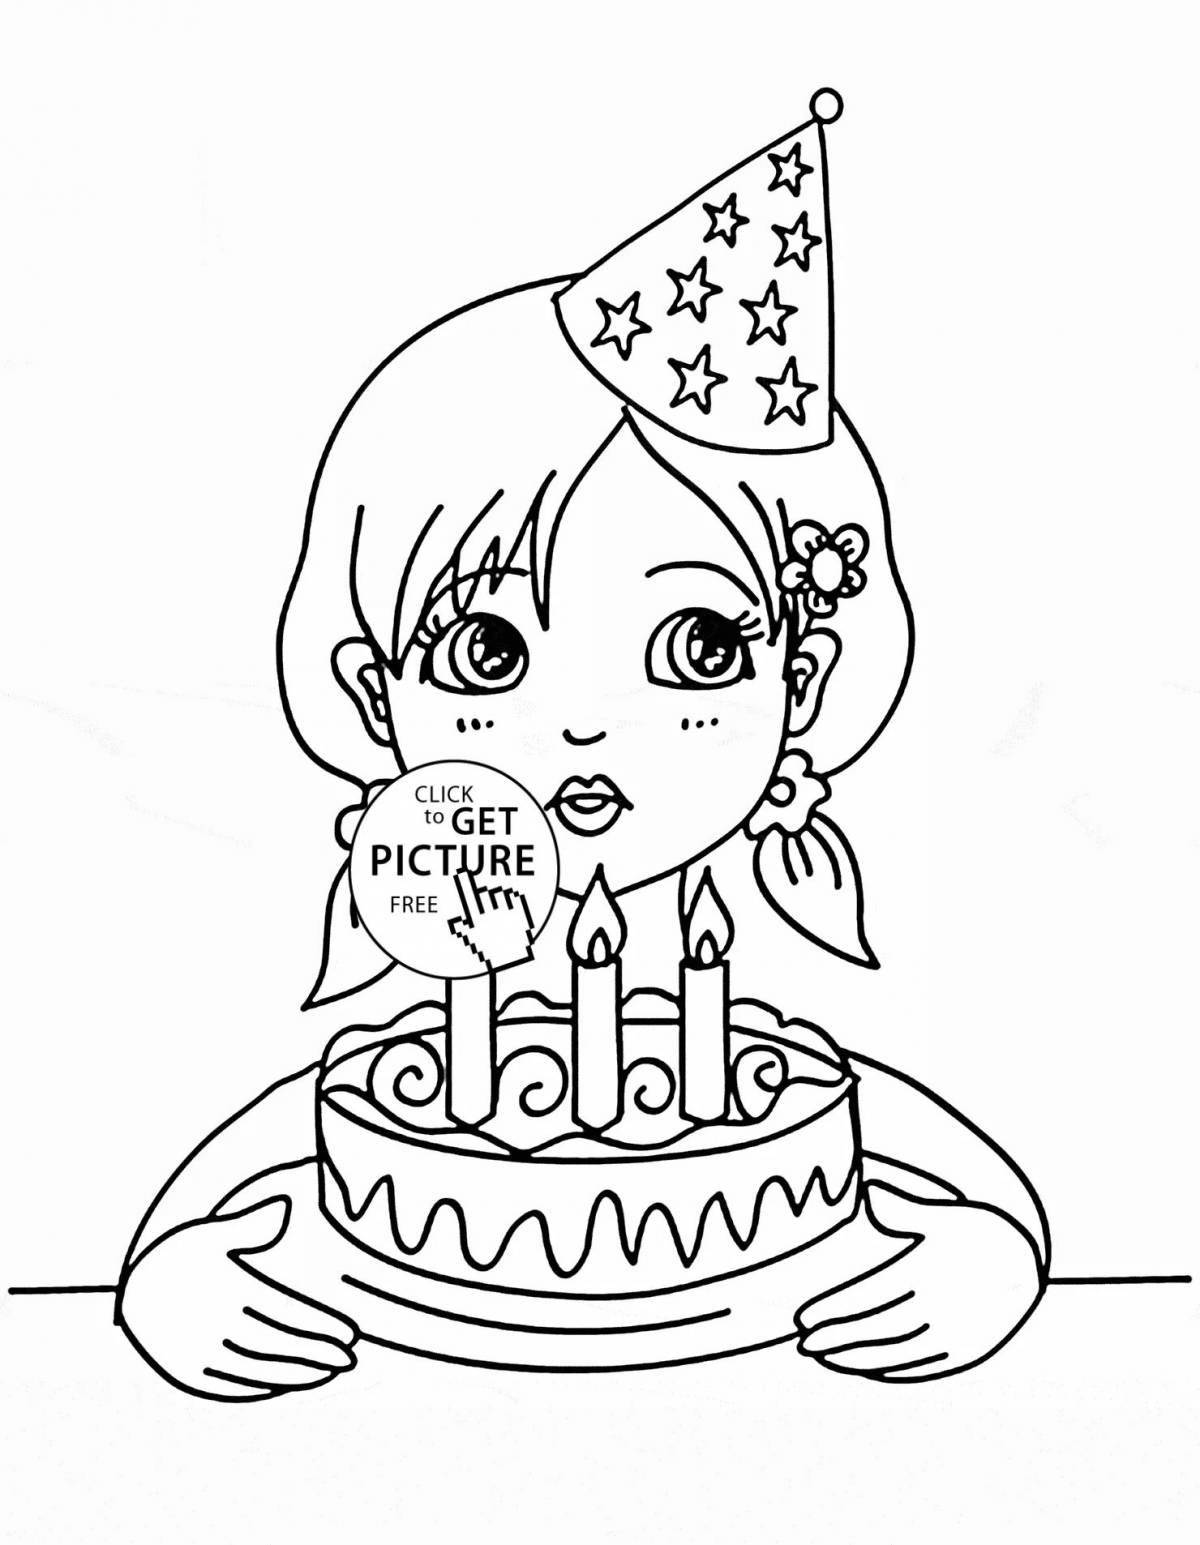 Coloring page joyful little sister for her birthday